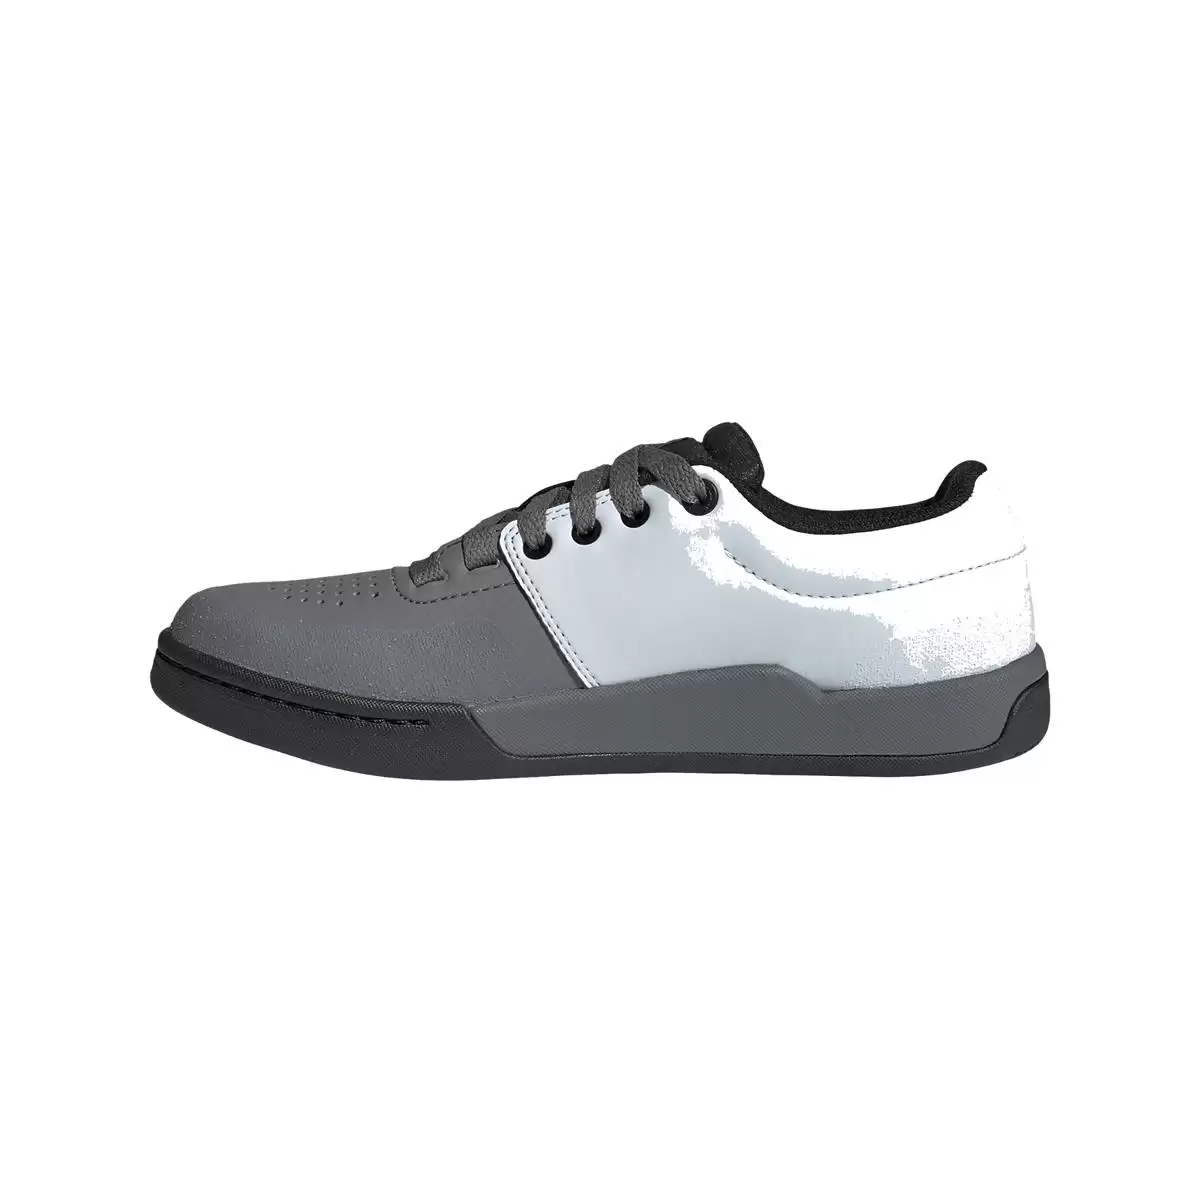 Chaussures Plates VTT Freerider Pro Blanc/Gris Taille 44,5 #3